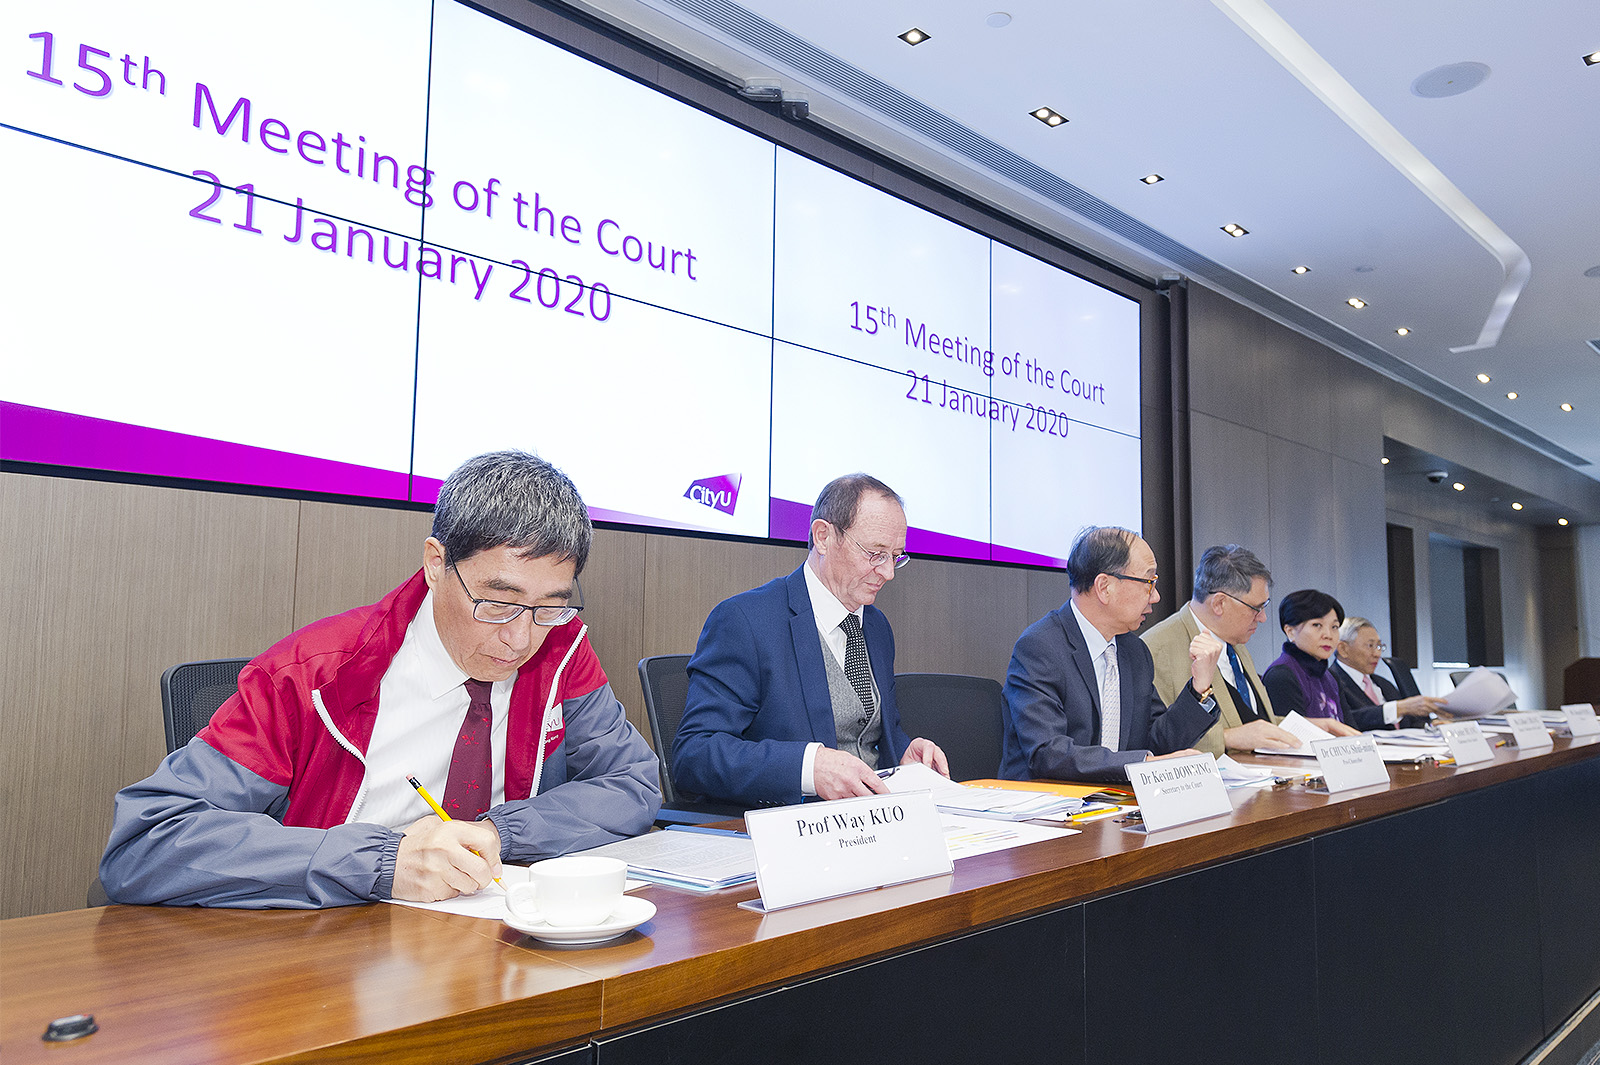 The Principal Officers of CityU brief the members of the Court about the latest developments at CityU.